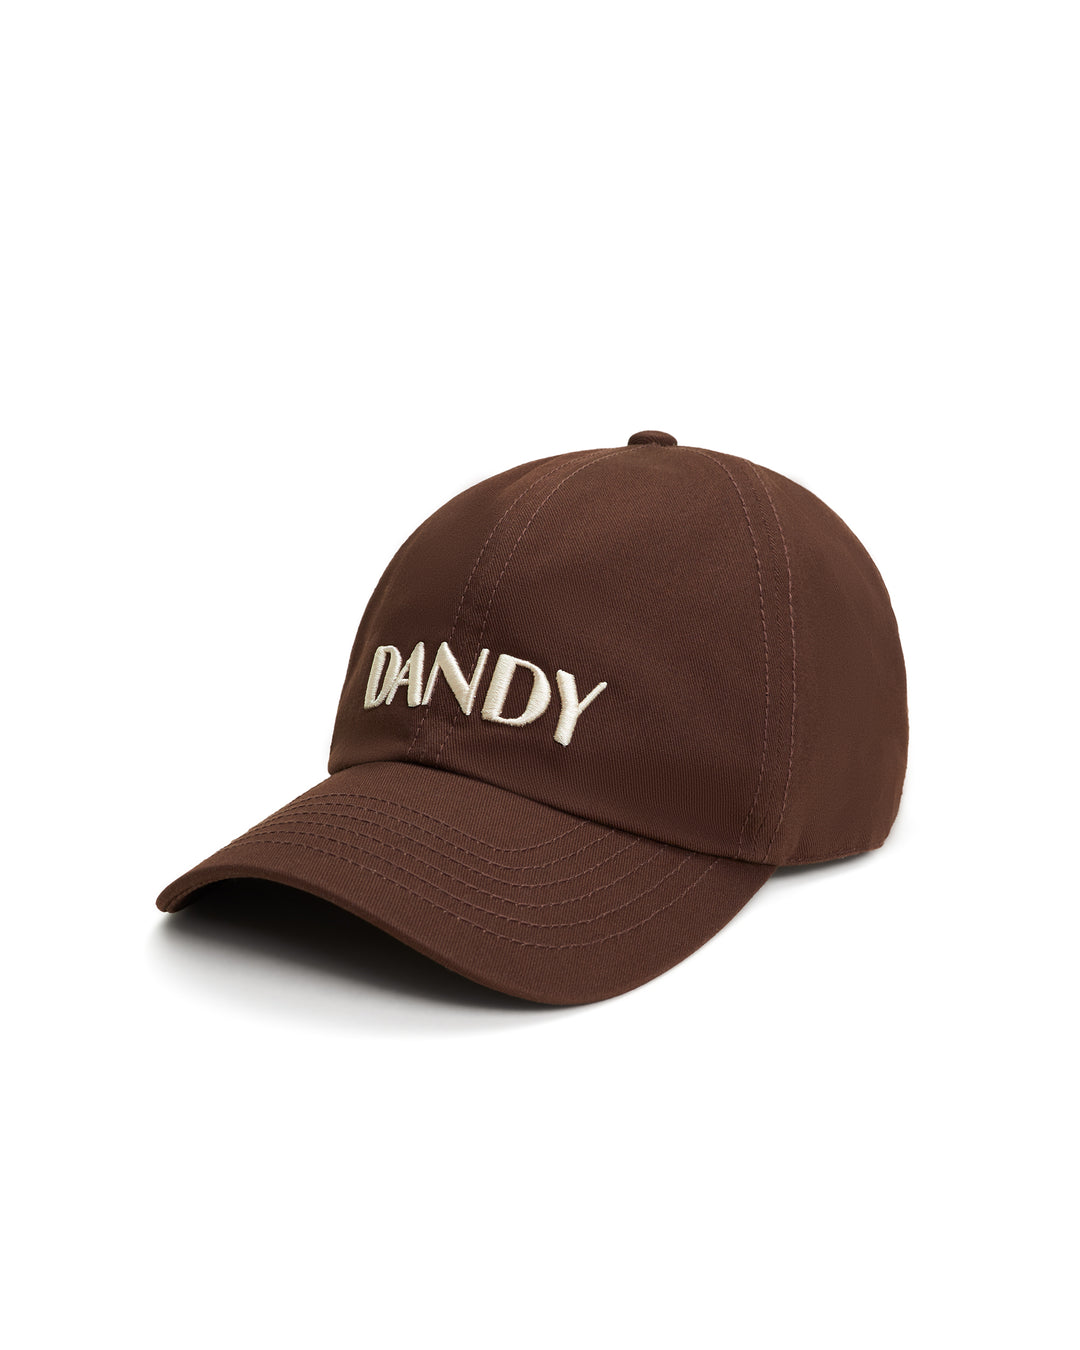 A brown Dandy Del Mar baseball cap with the word "Dandy" on it, featuring a jacquard lining and designed as a 6-panel baseball cap.